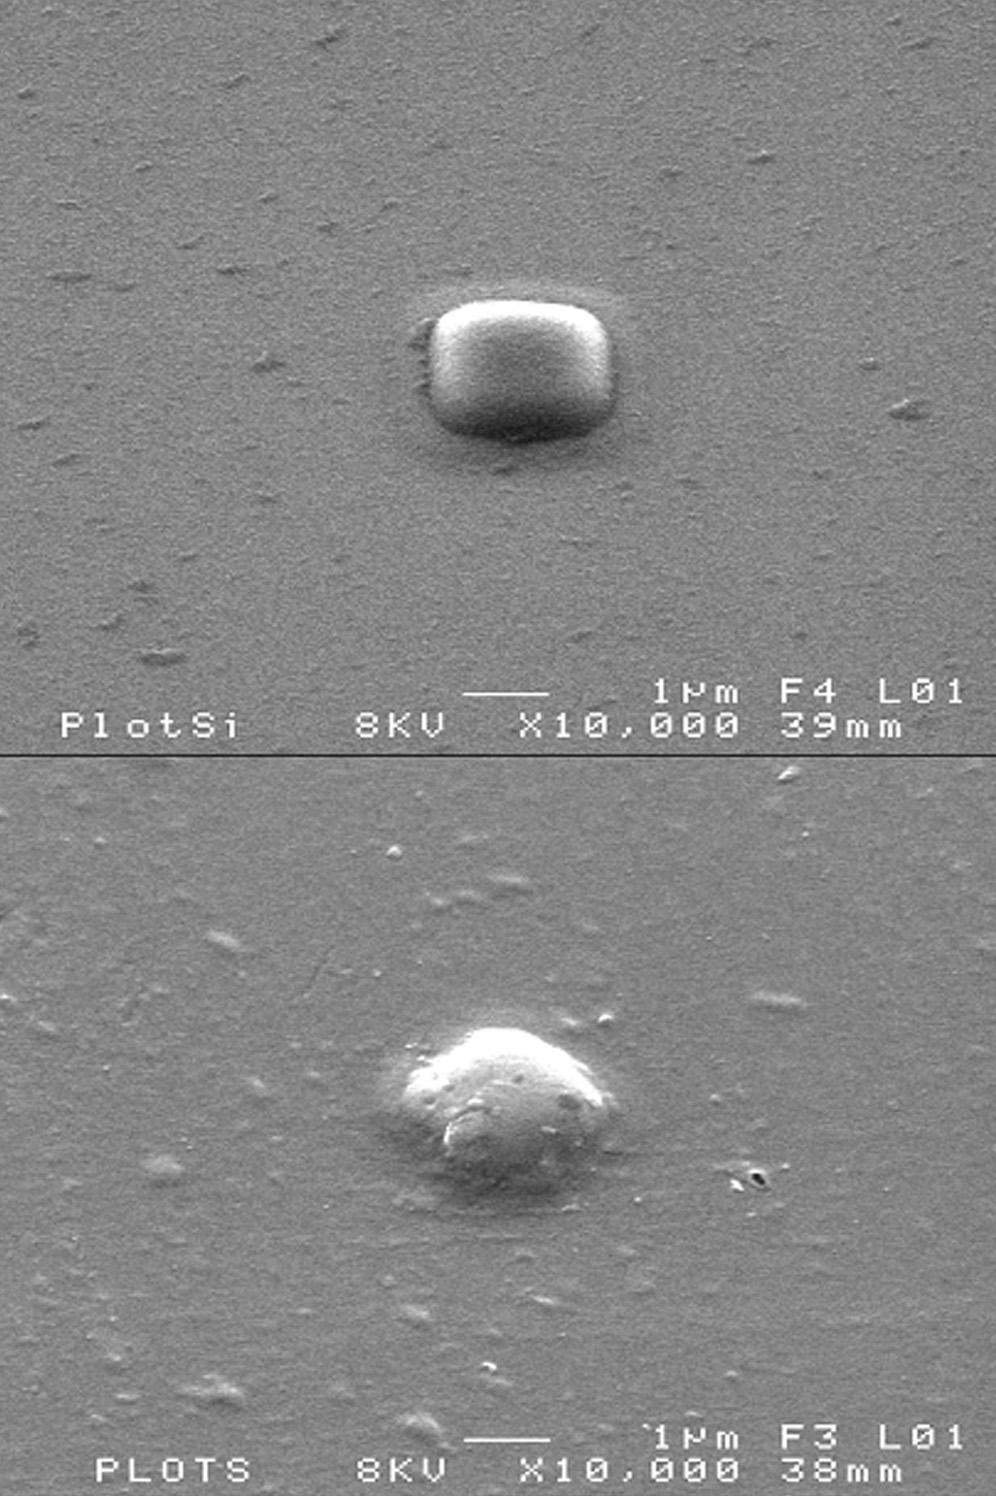 4 M Denoual, P Mognol, and B Lepioufle Fig. 4 SEM images of a submicrometre oxide dot and its replication in resin below.